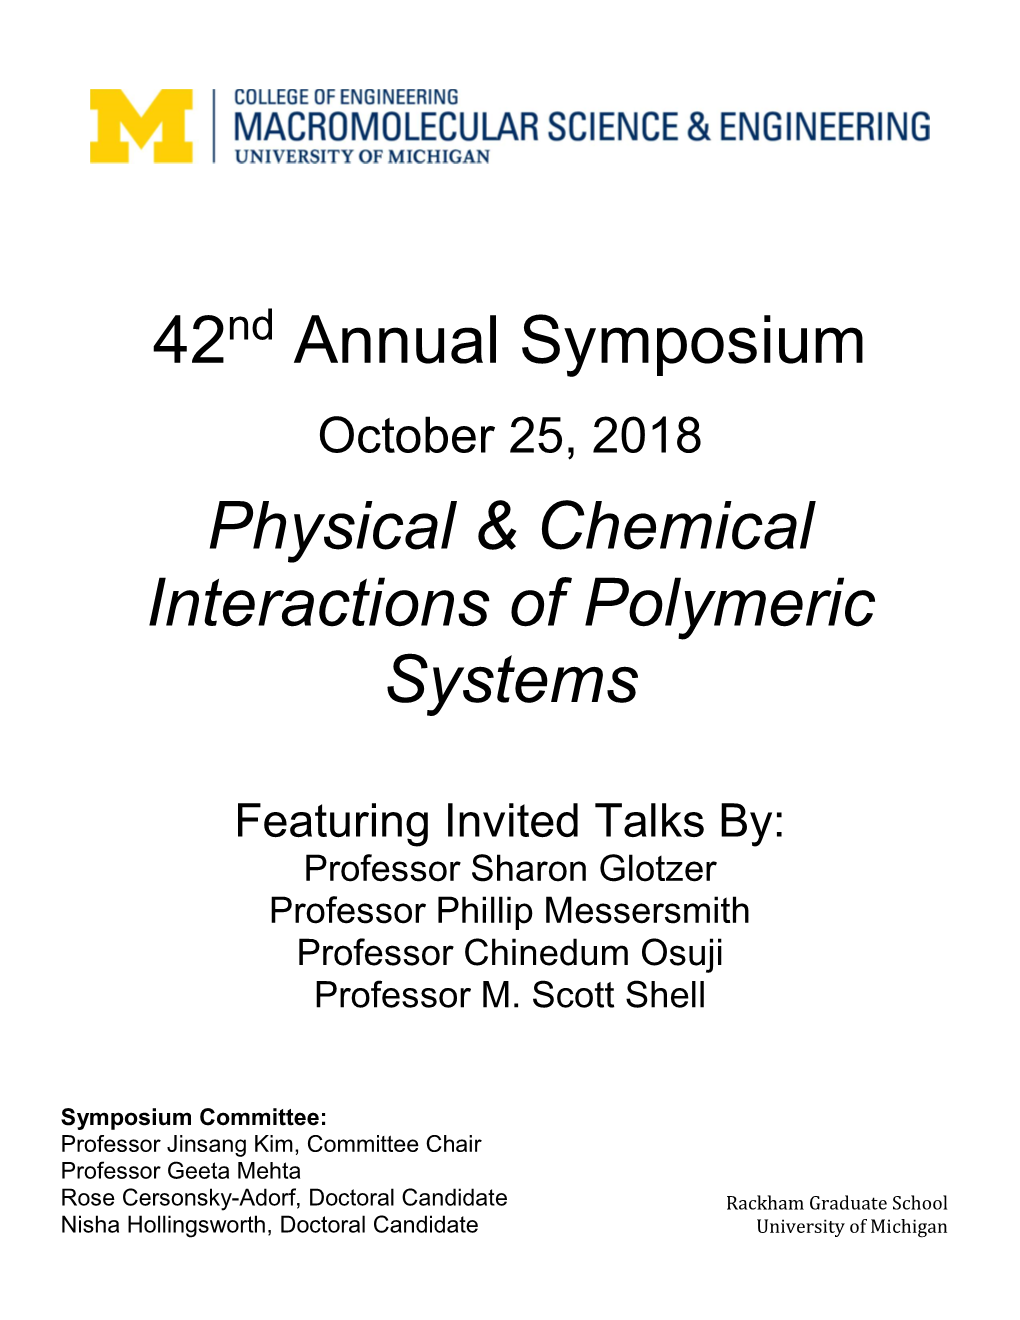 Physical & Chemical Interactions of Polymeric Systems